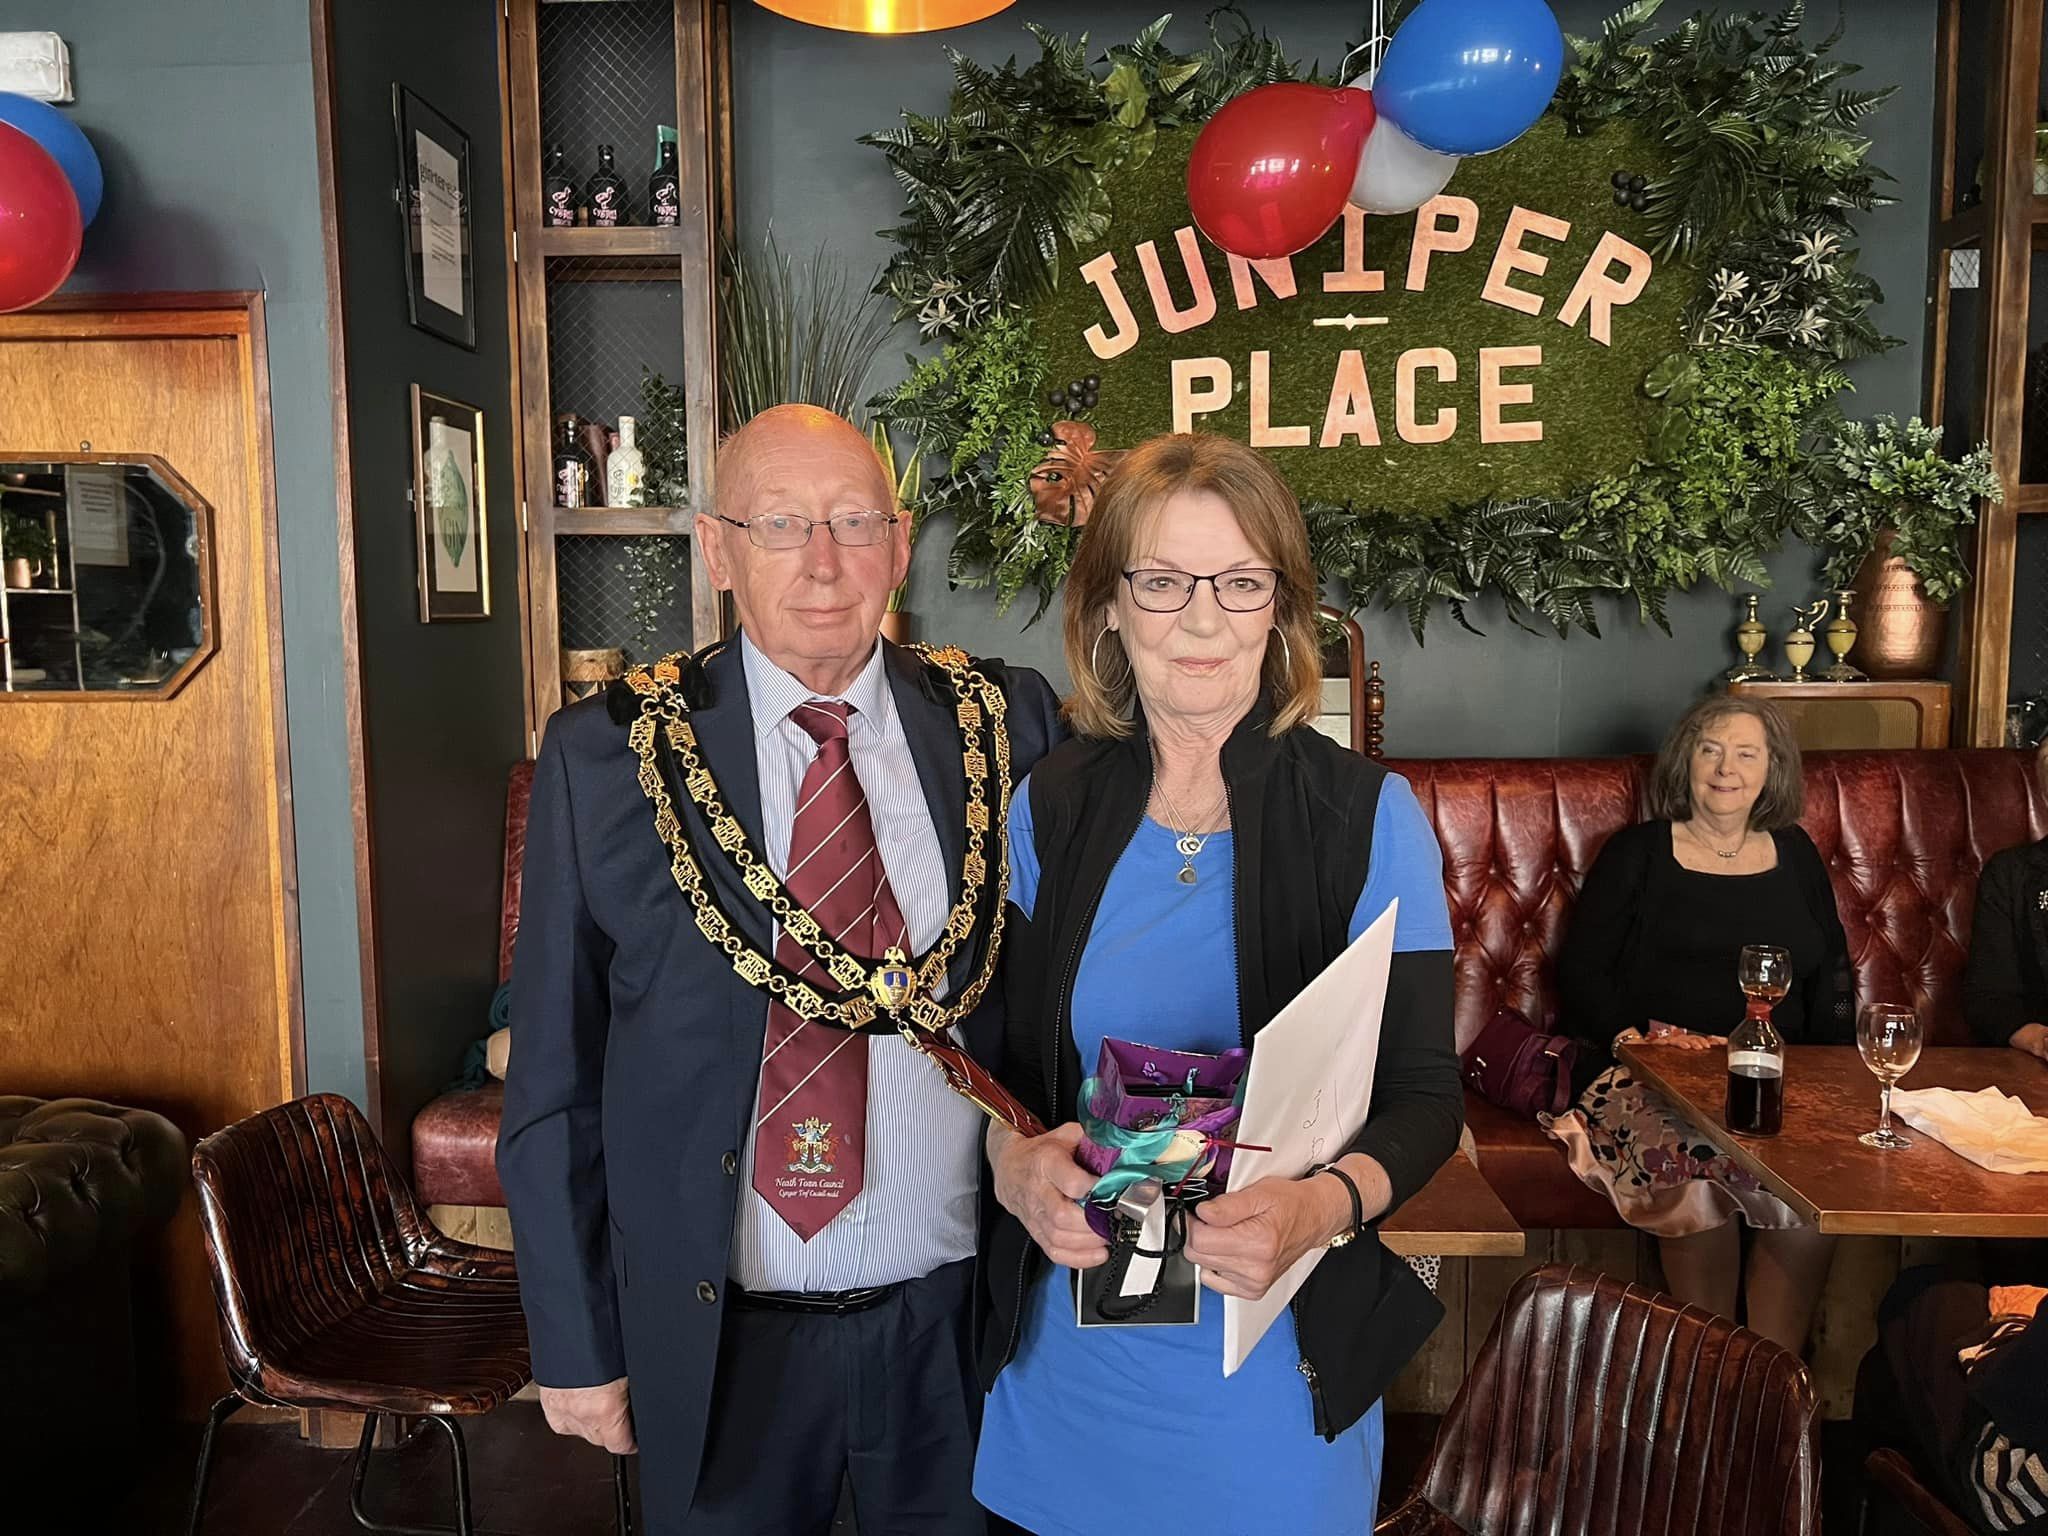 The Mayor and Lyn Rawle holding her gift in Juniper Place at her retirement party